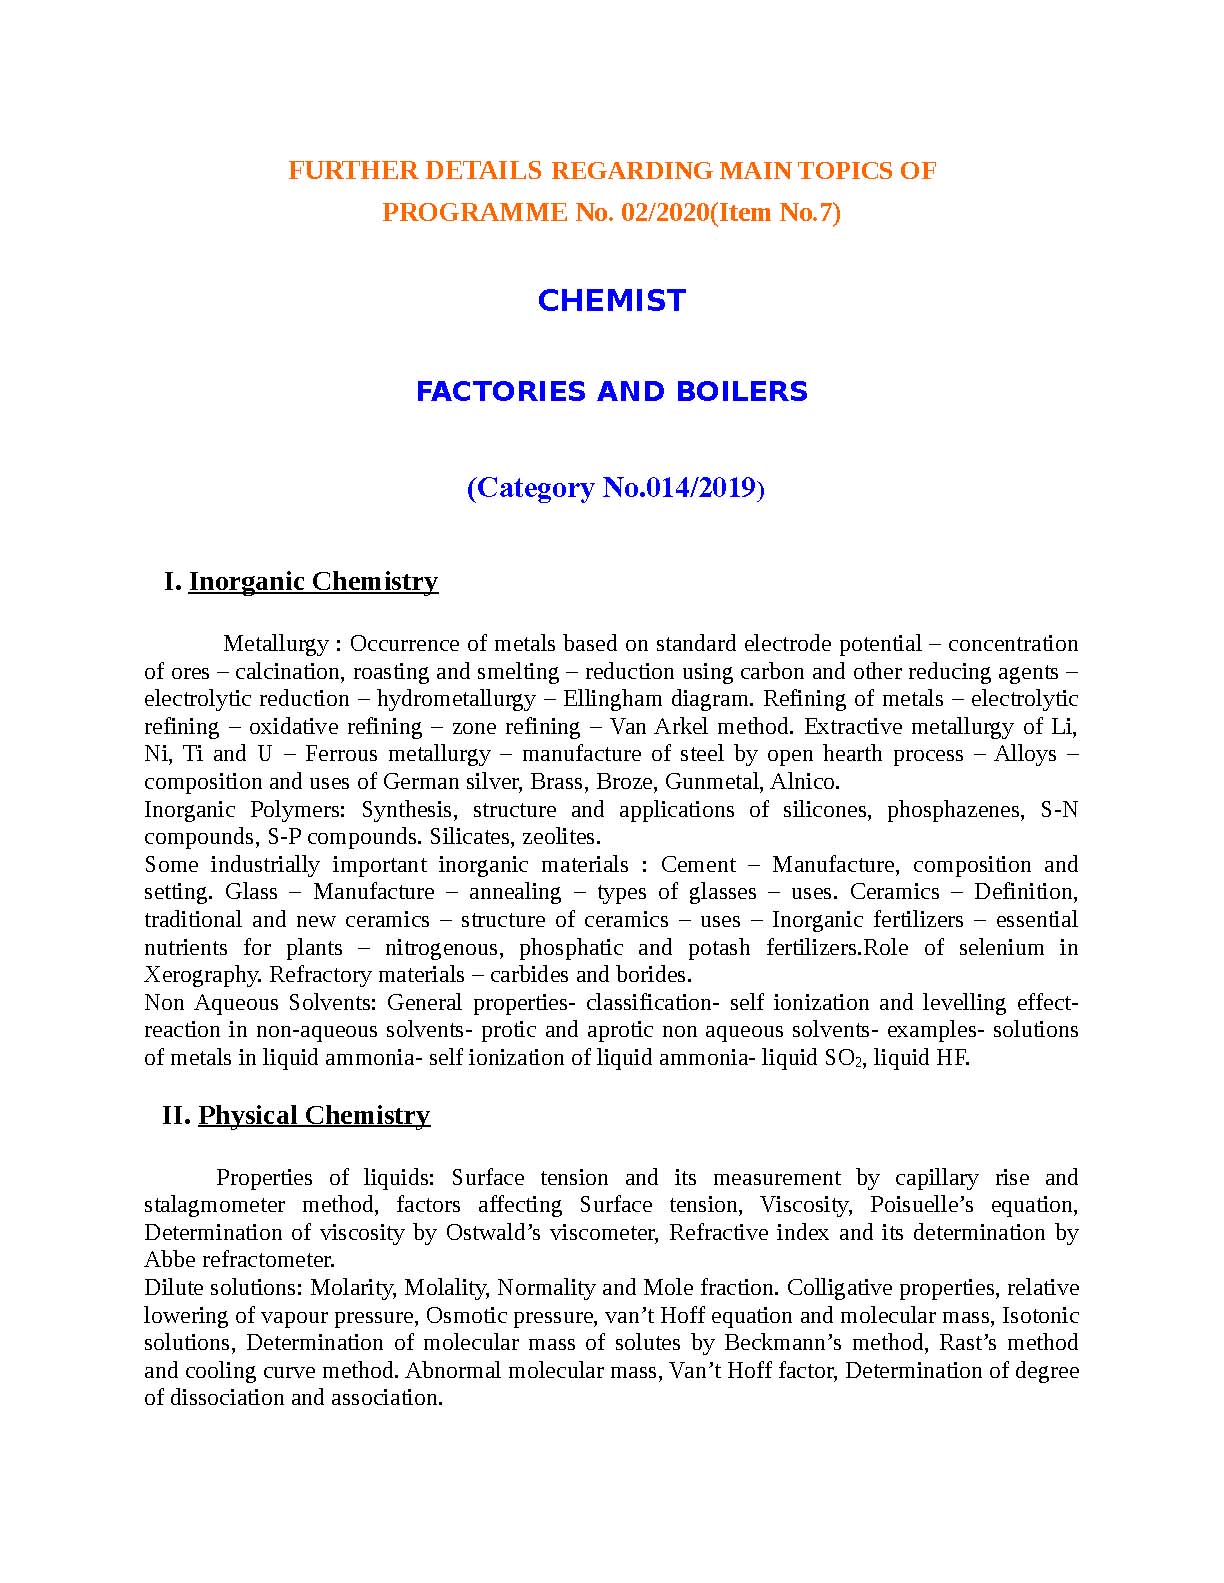 Kerala PSC Chemist Factories And Boilers Exam Syllabus - Notification Image 1